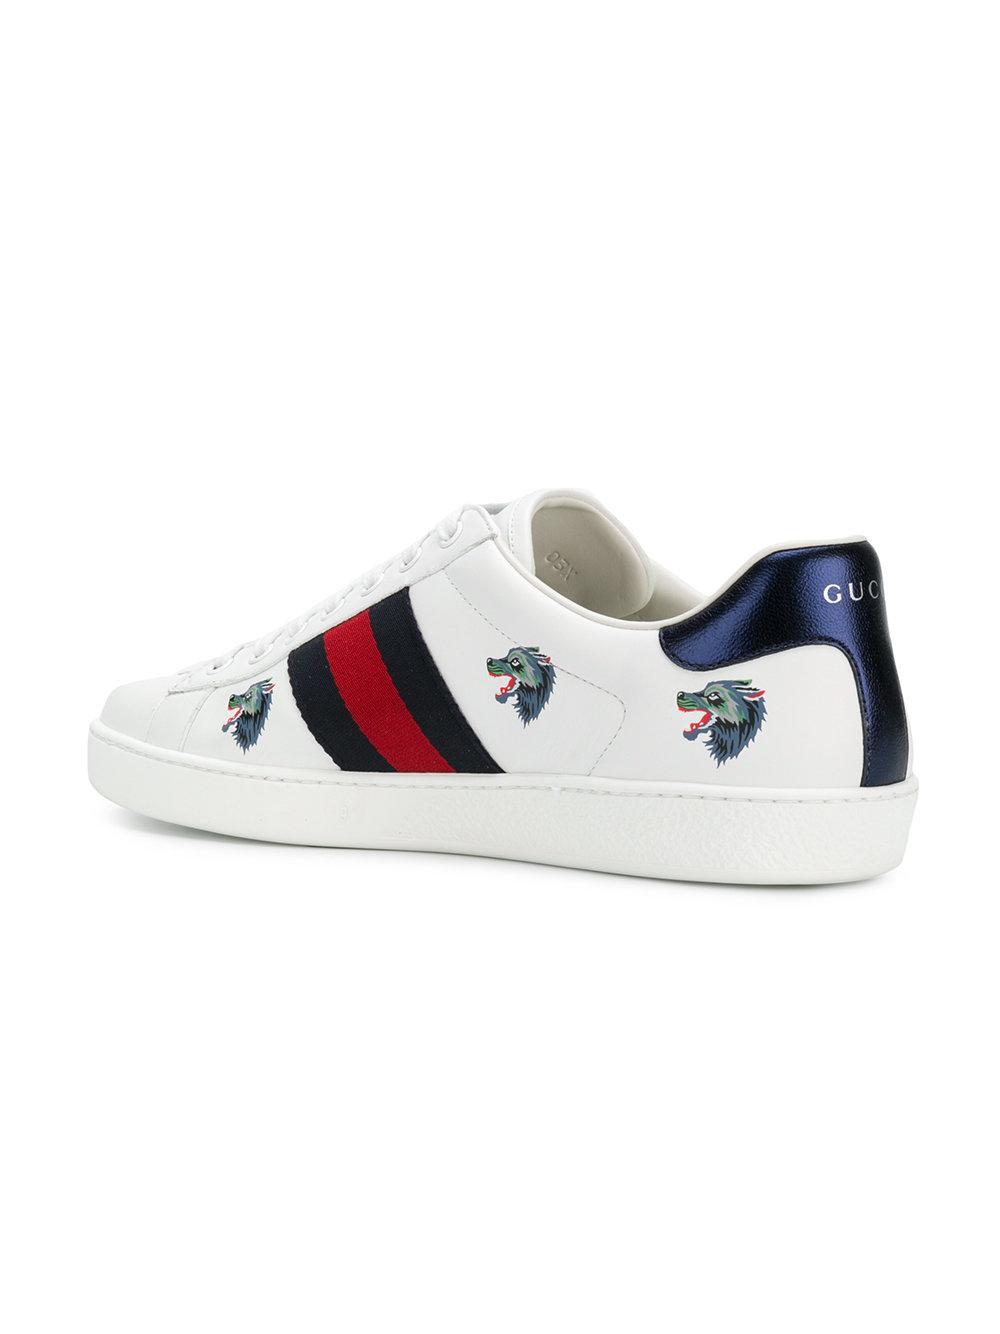 Gucci Ace Wolf-embroidered Sneakers in White | Lyst